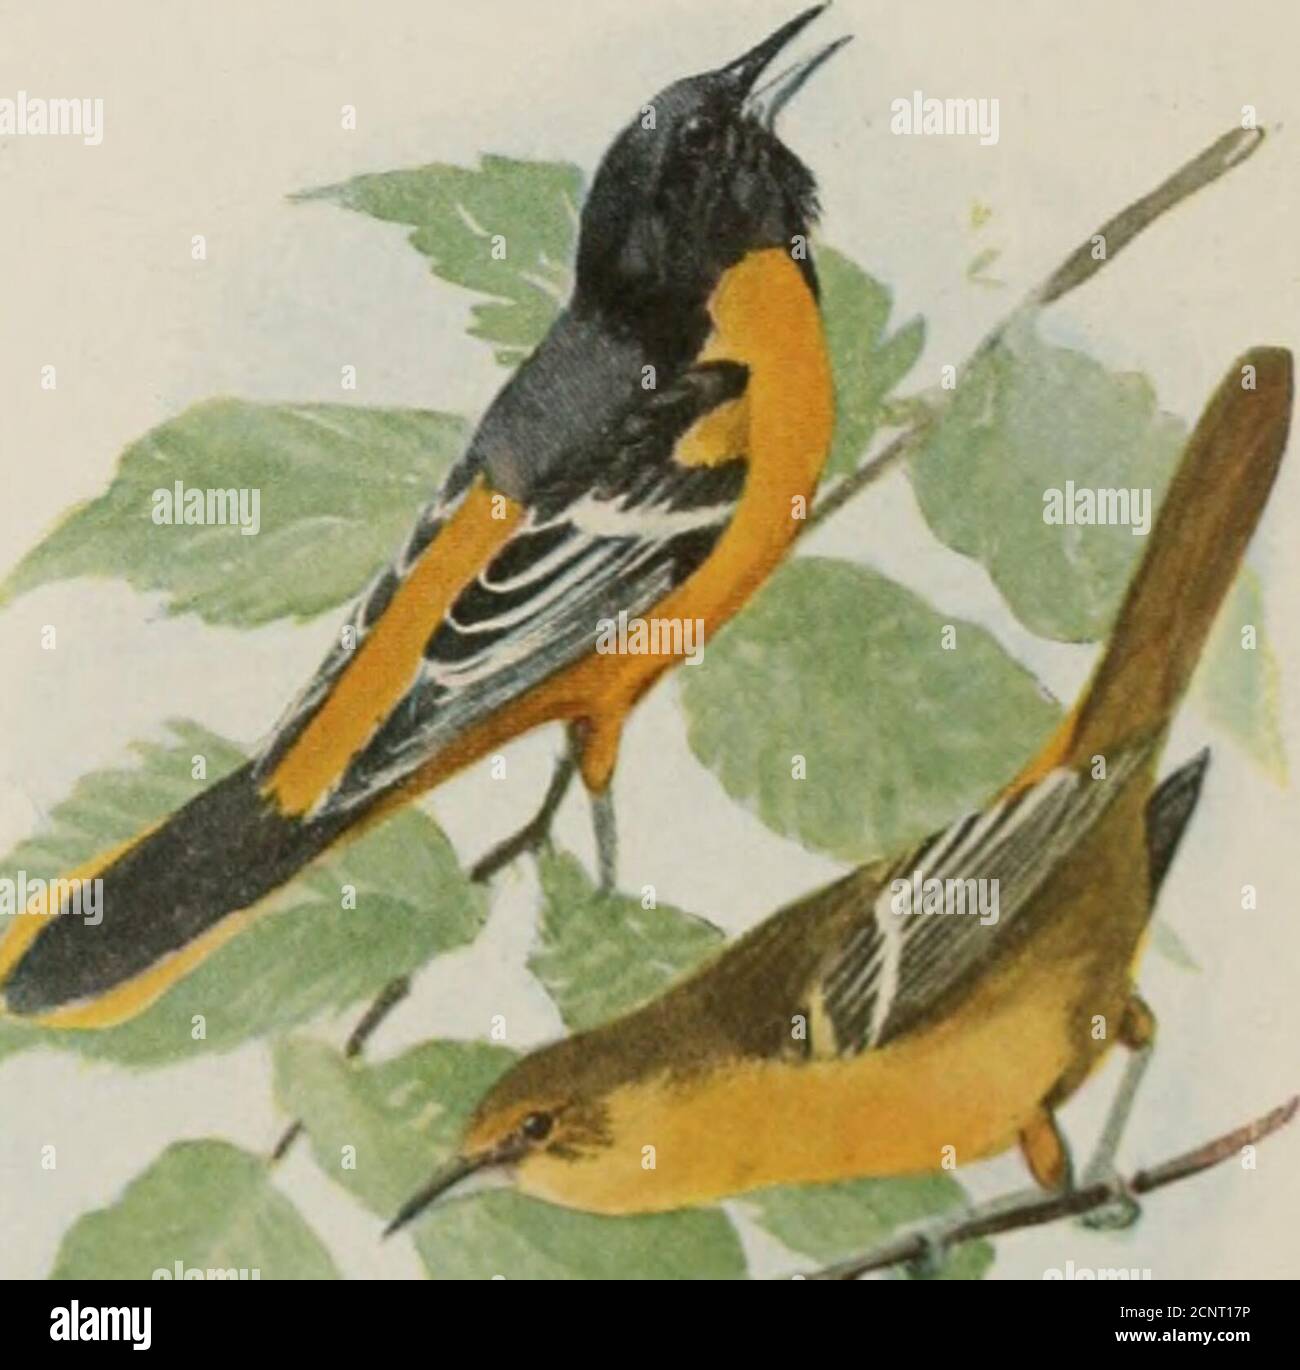 . The book of birds; common birds of town and country and American game birds . TOVVIIKK OR CllKW 1K Male, upper; female, lowerOrchard Oriolk Male, upper; female, Ujwer Calikorma liKow n Tow HitBaltimore Oriole Male, upper; female, lower 29 TREE SWALLOW (Iridoprocne bicolor) Length, about 6 inches. The steel blue upperparts and pure white under parts are distin-guishing characteristics. Range: Breeds from northwestern Alaskaand northern Canada south to southern Cali-fornia, Colorado, Kansas, Missouri, and ir-ginia; winters in central California, southernTexas and Gulf States, and south to (n Stock Photo